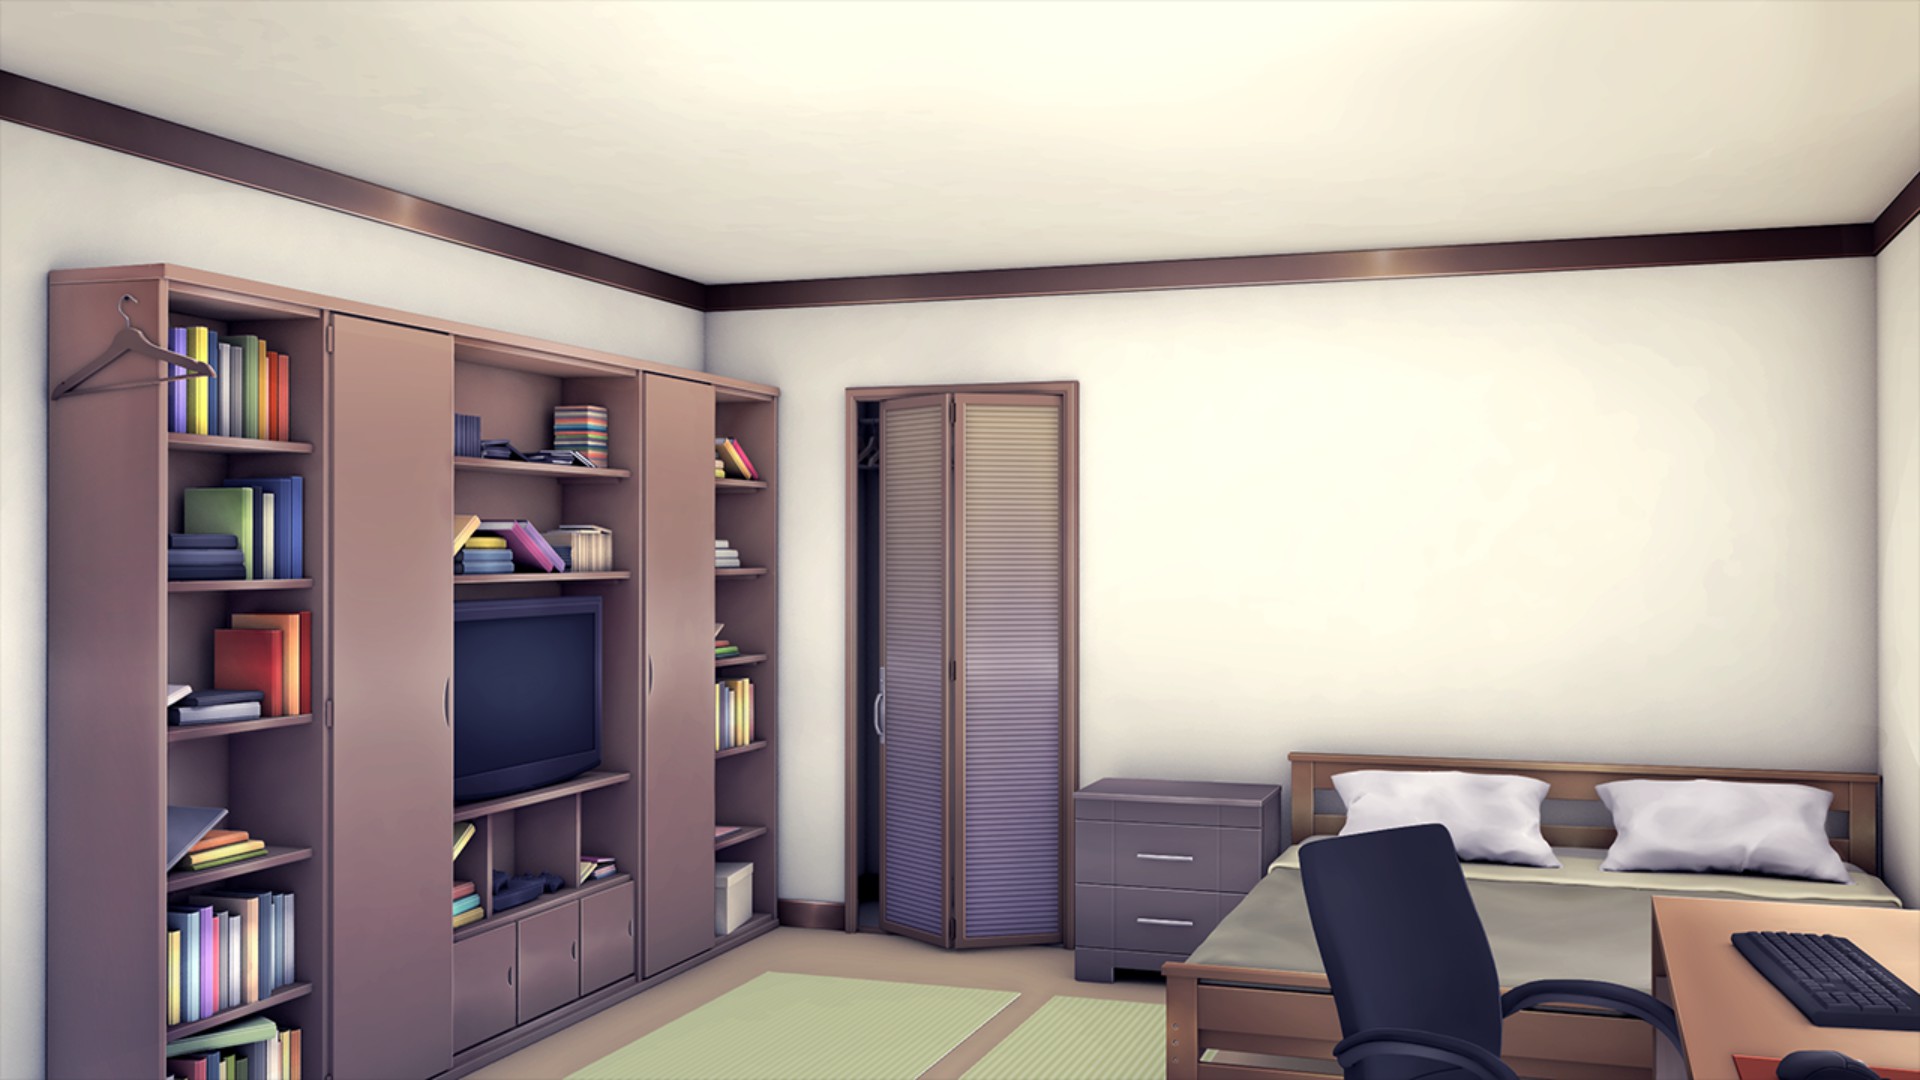 Adding Custom Backgrounds & Furniture To Monika After Story- A Guide Using  tw4449's submod 